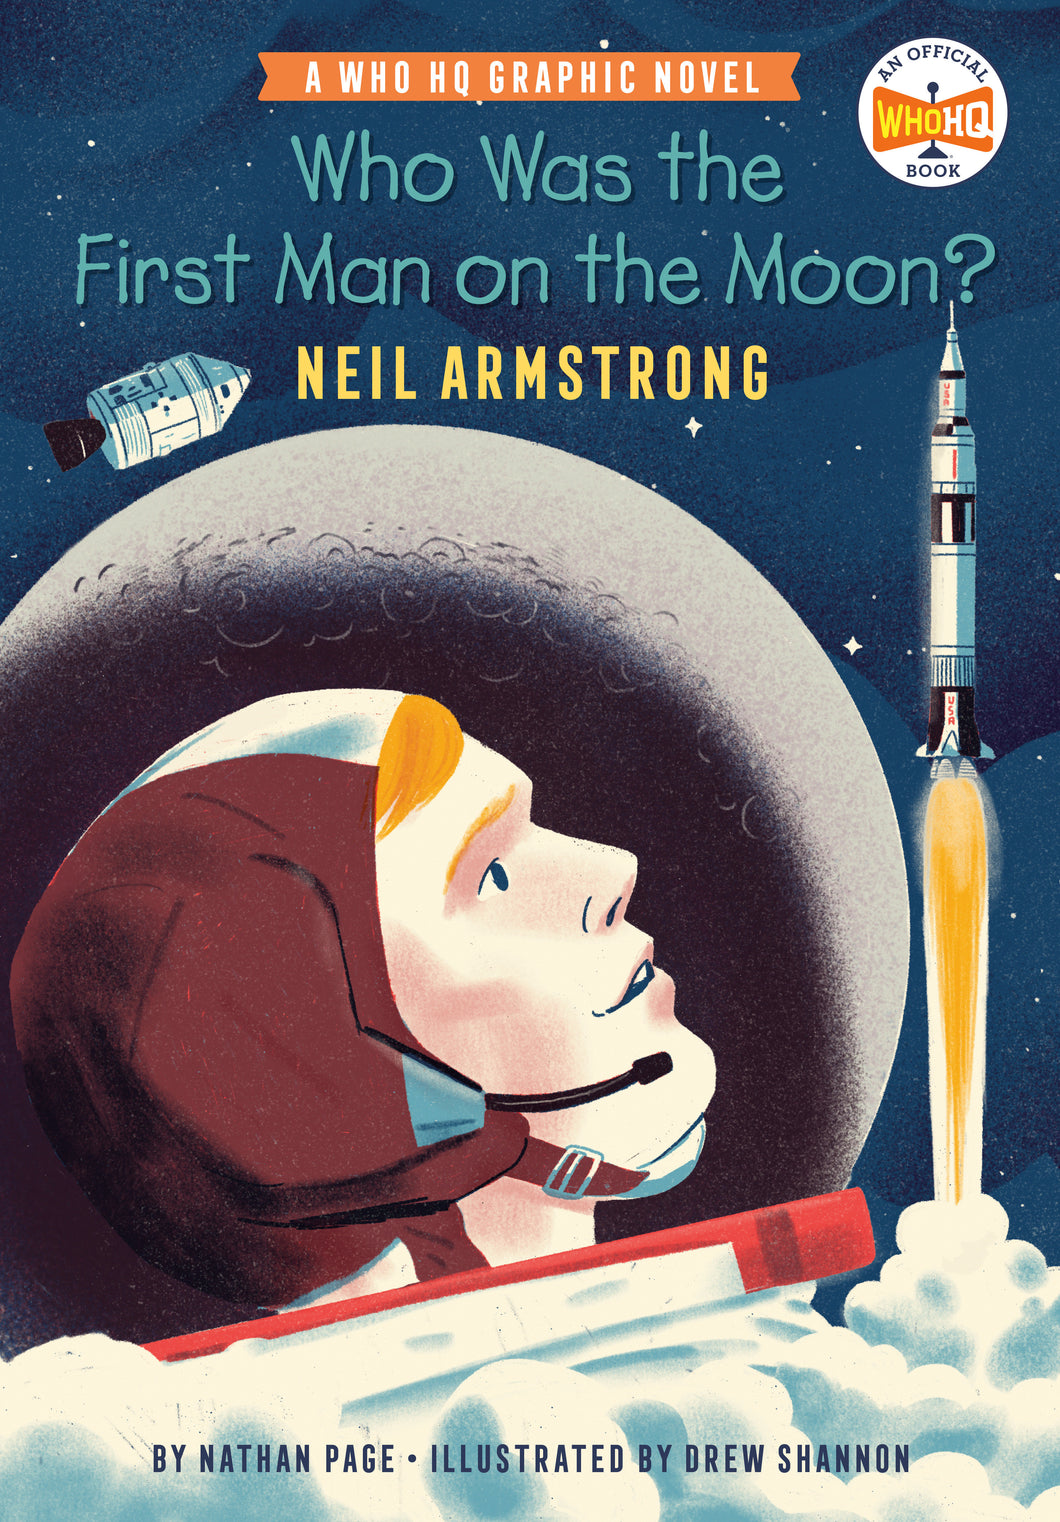 Who Was the First Man on the Moon?: Neil Armstrong: A Who HQ Graphic Novel